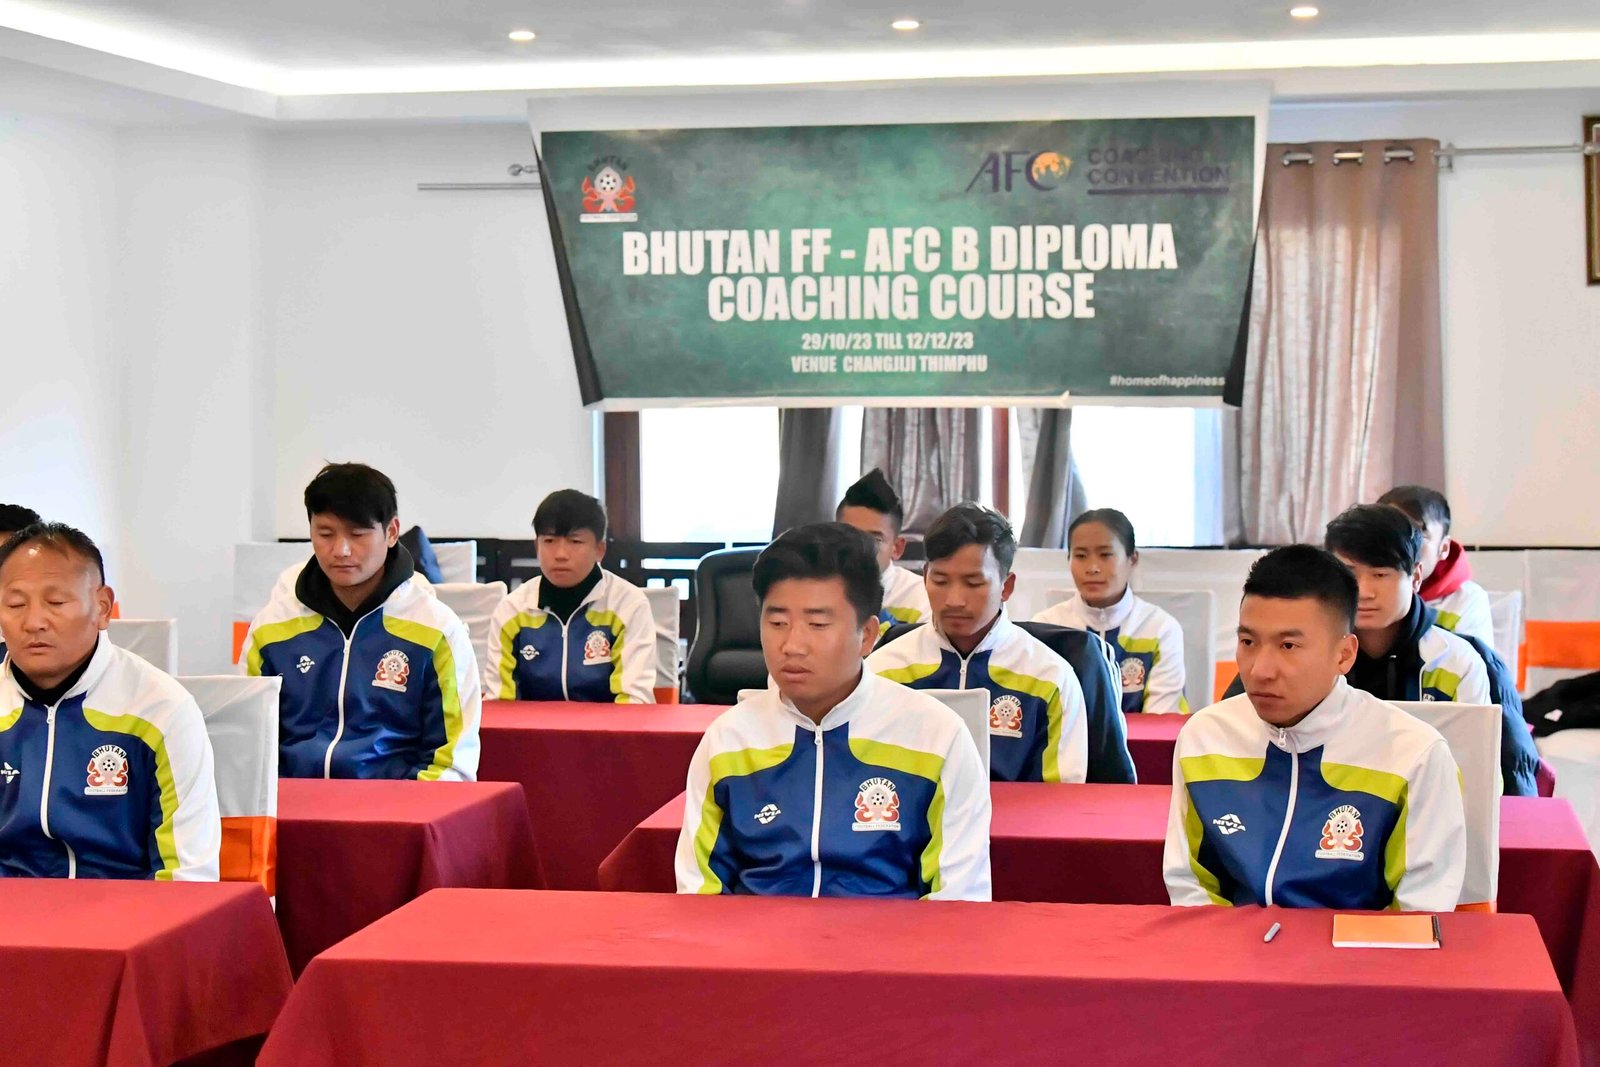 The BFF-AFC B Diploma Coaching Course concluded